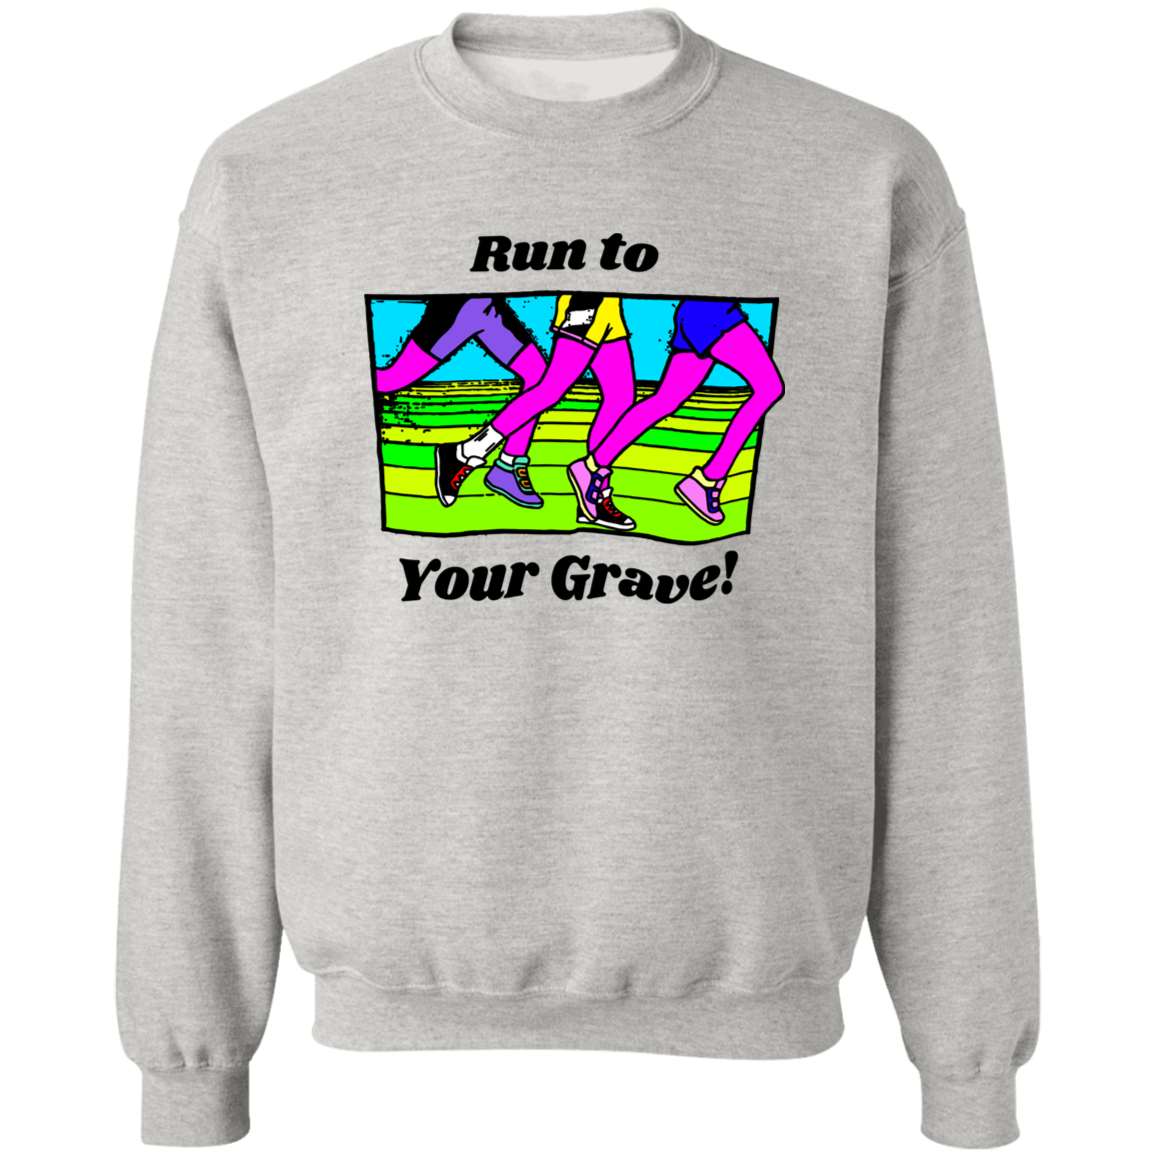 Run to Your Grave